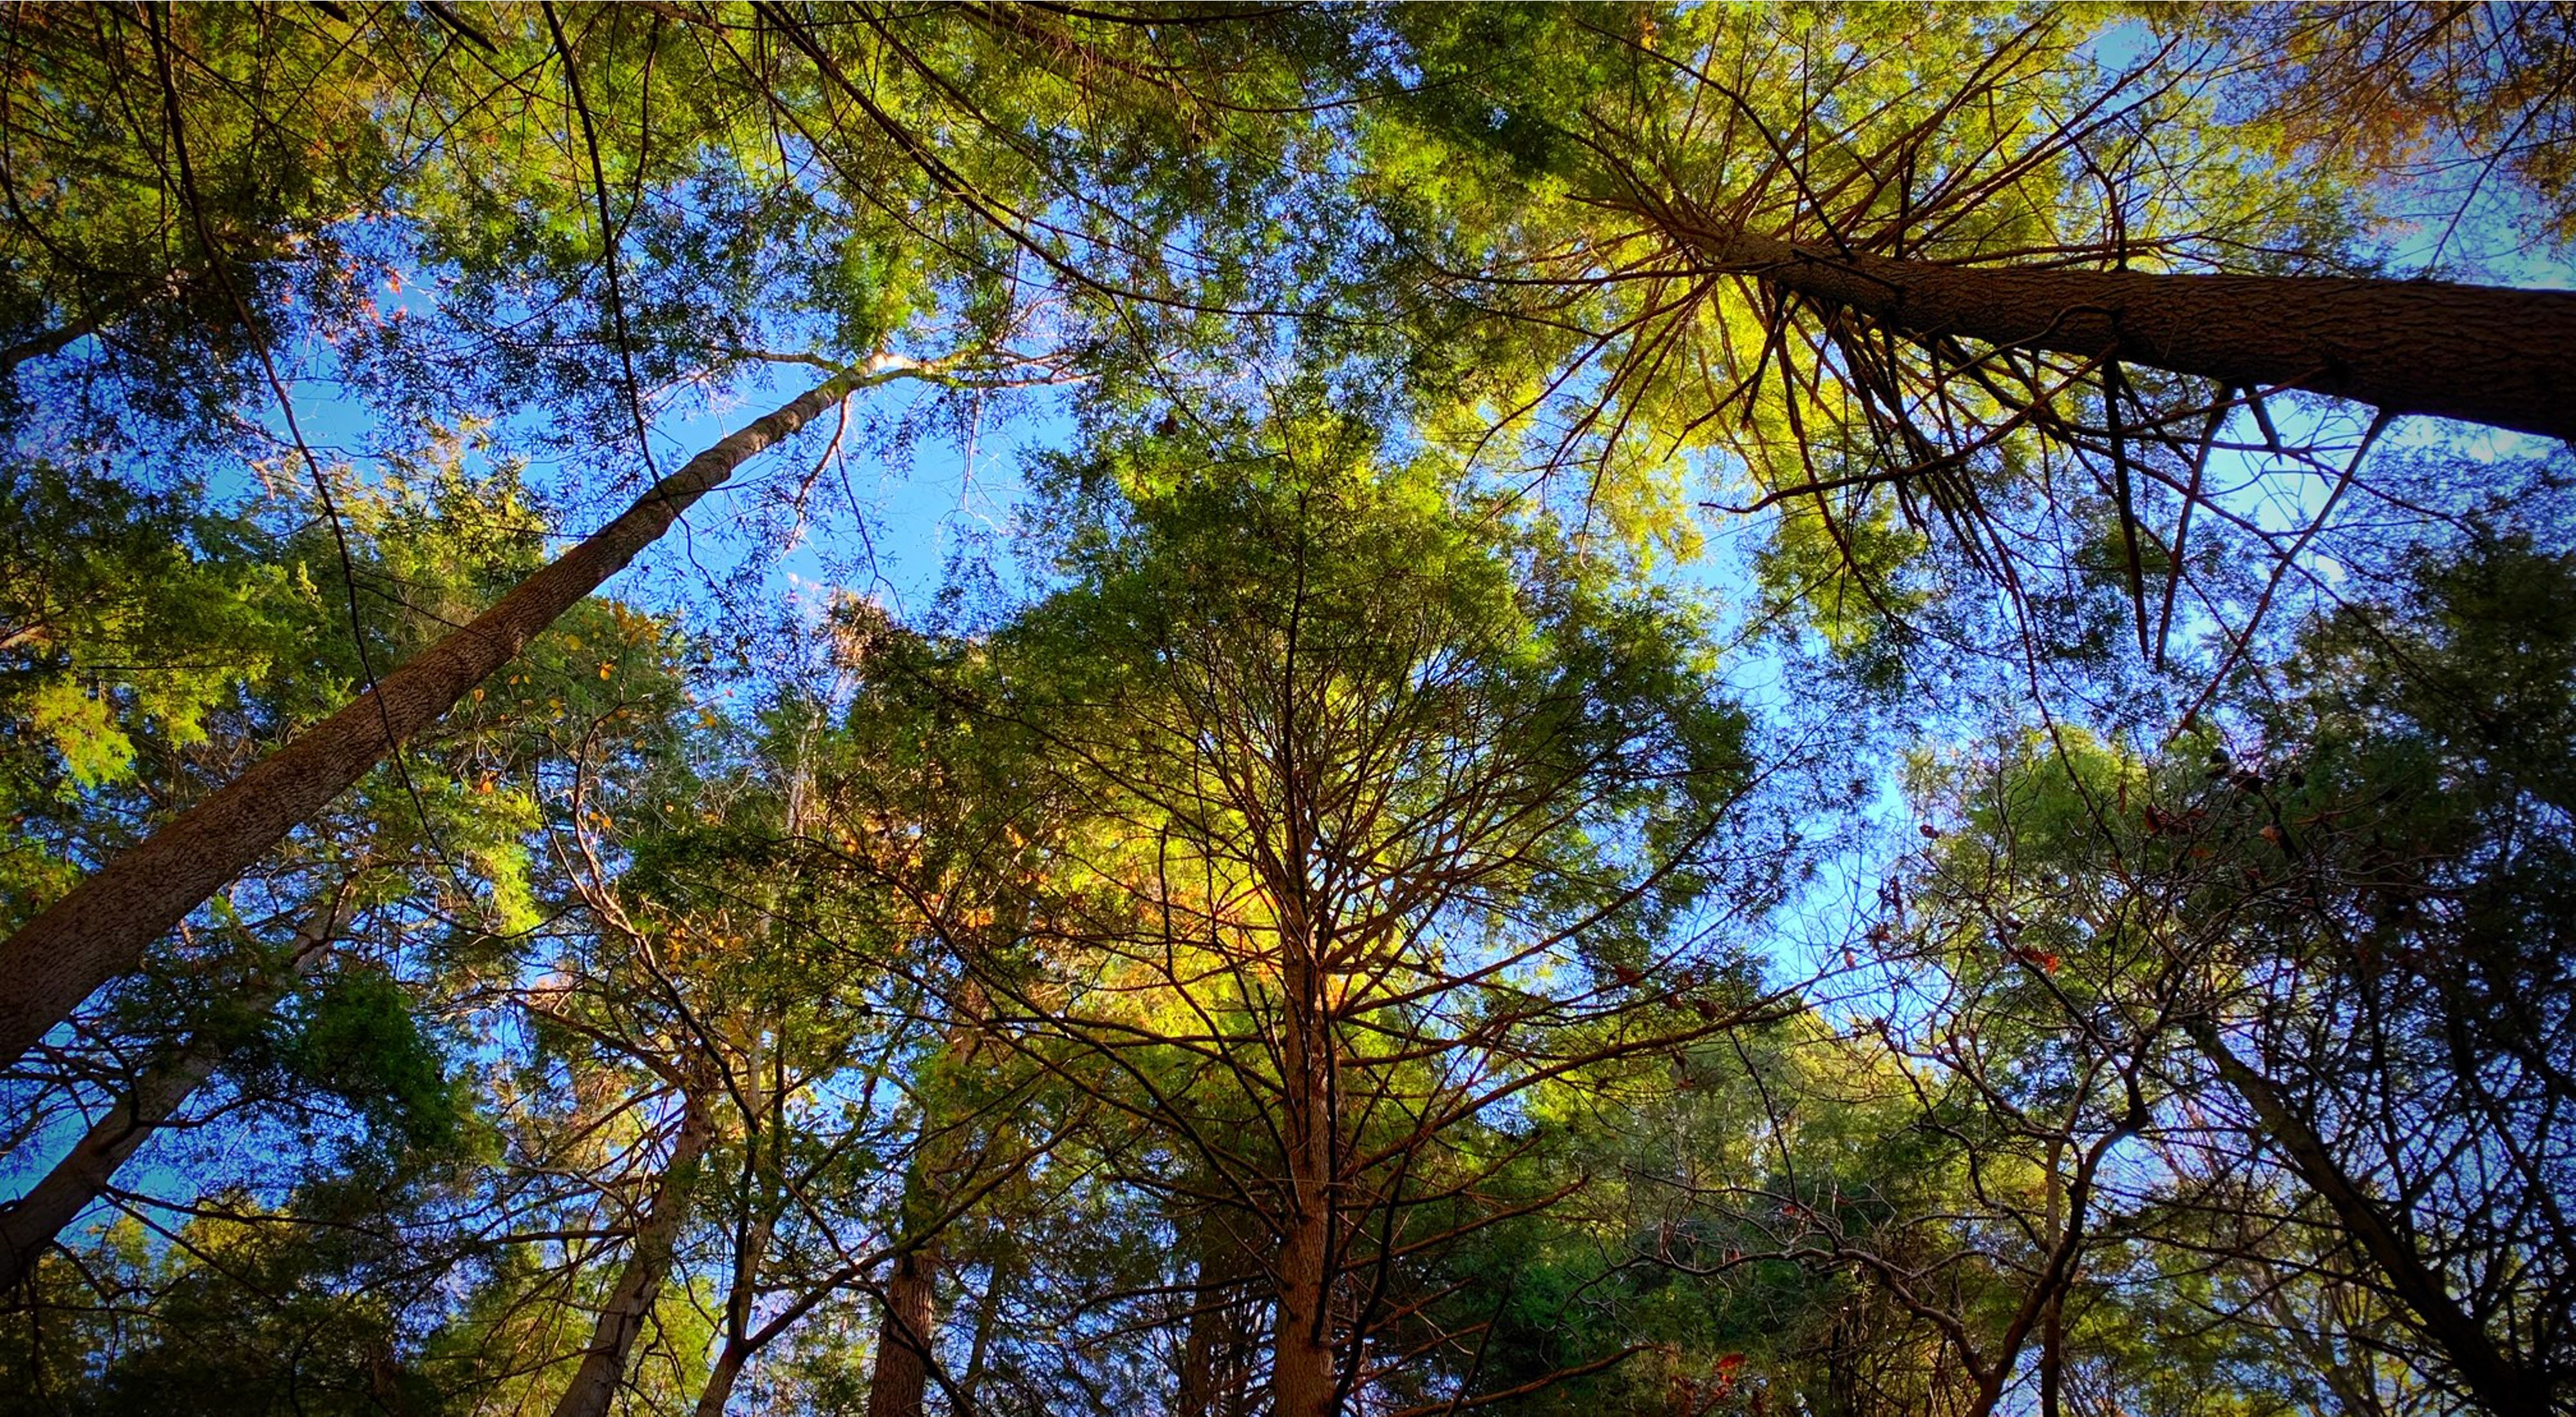 A blue sky is viewed through a dense tree canopy of green leaves.